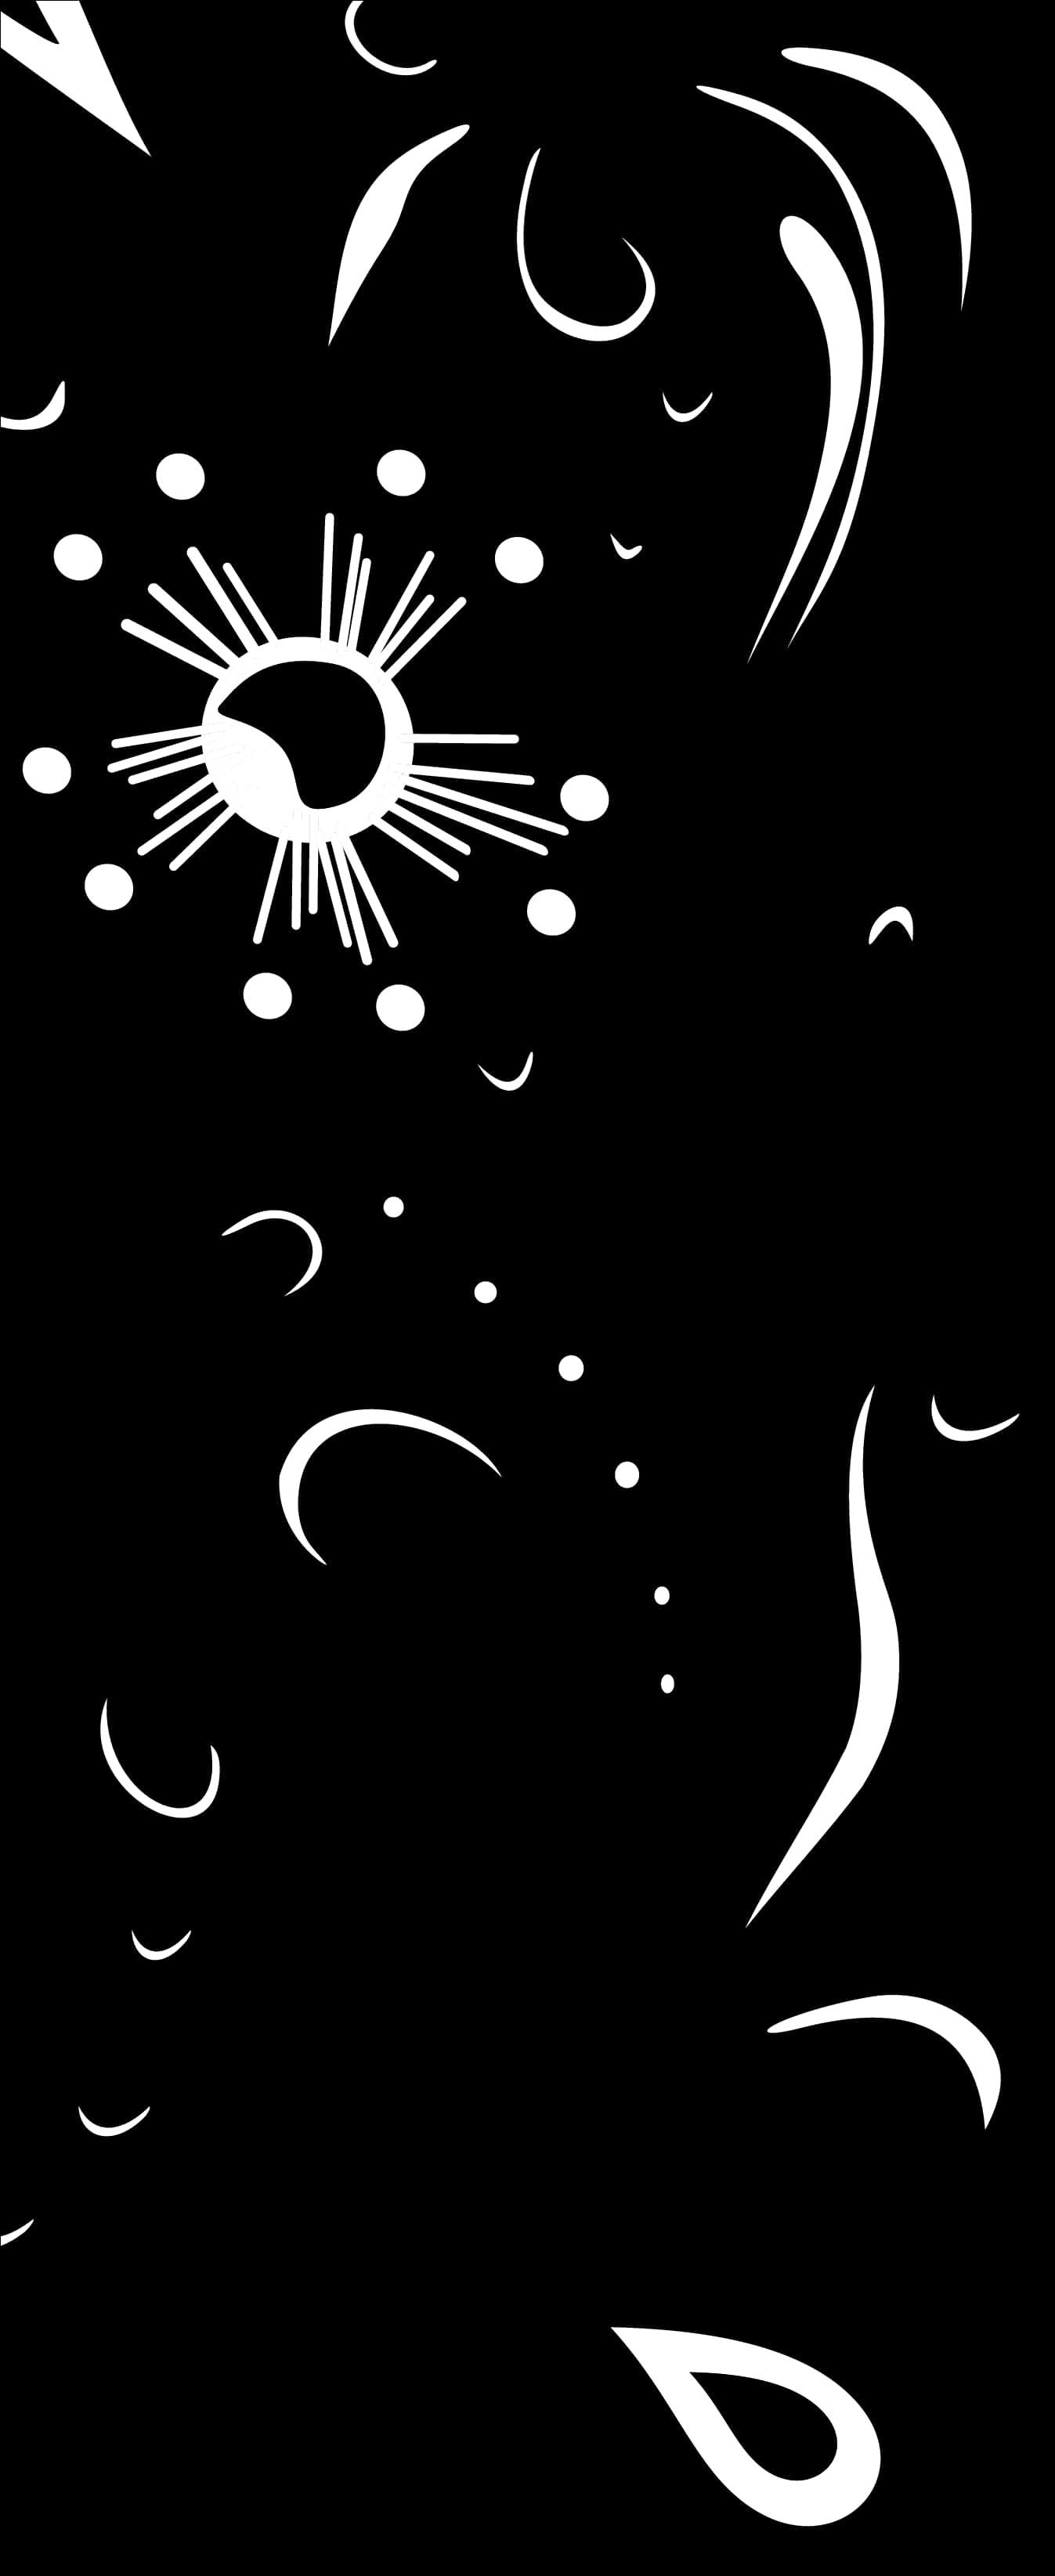 Abstract Sunand Swirls Black Background PNG